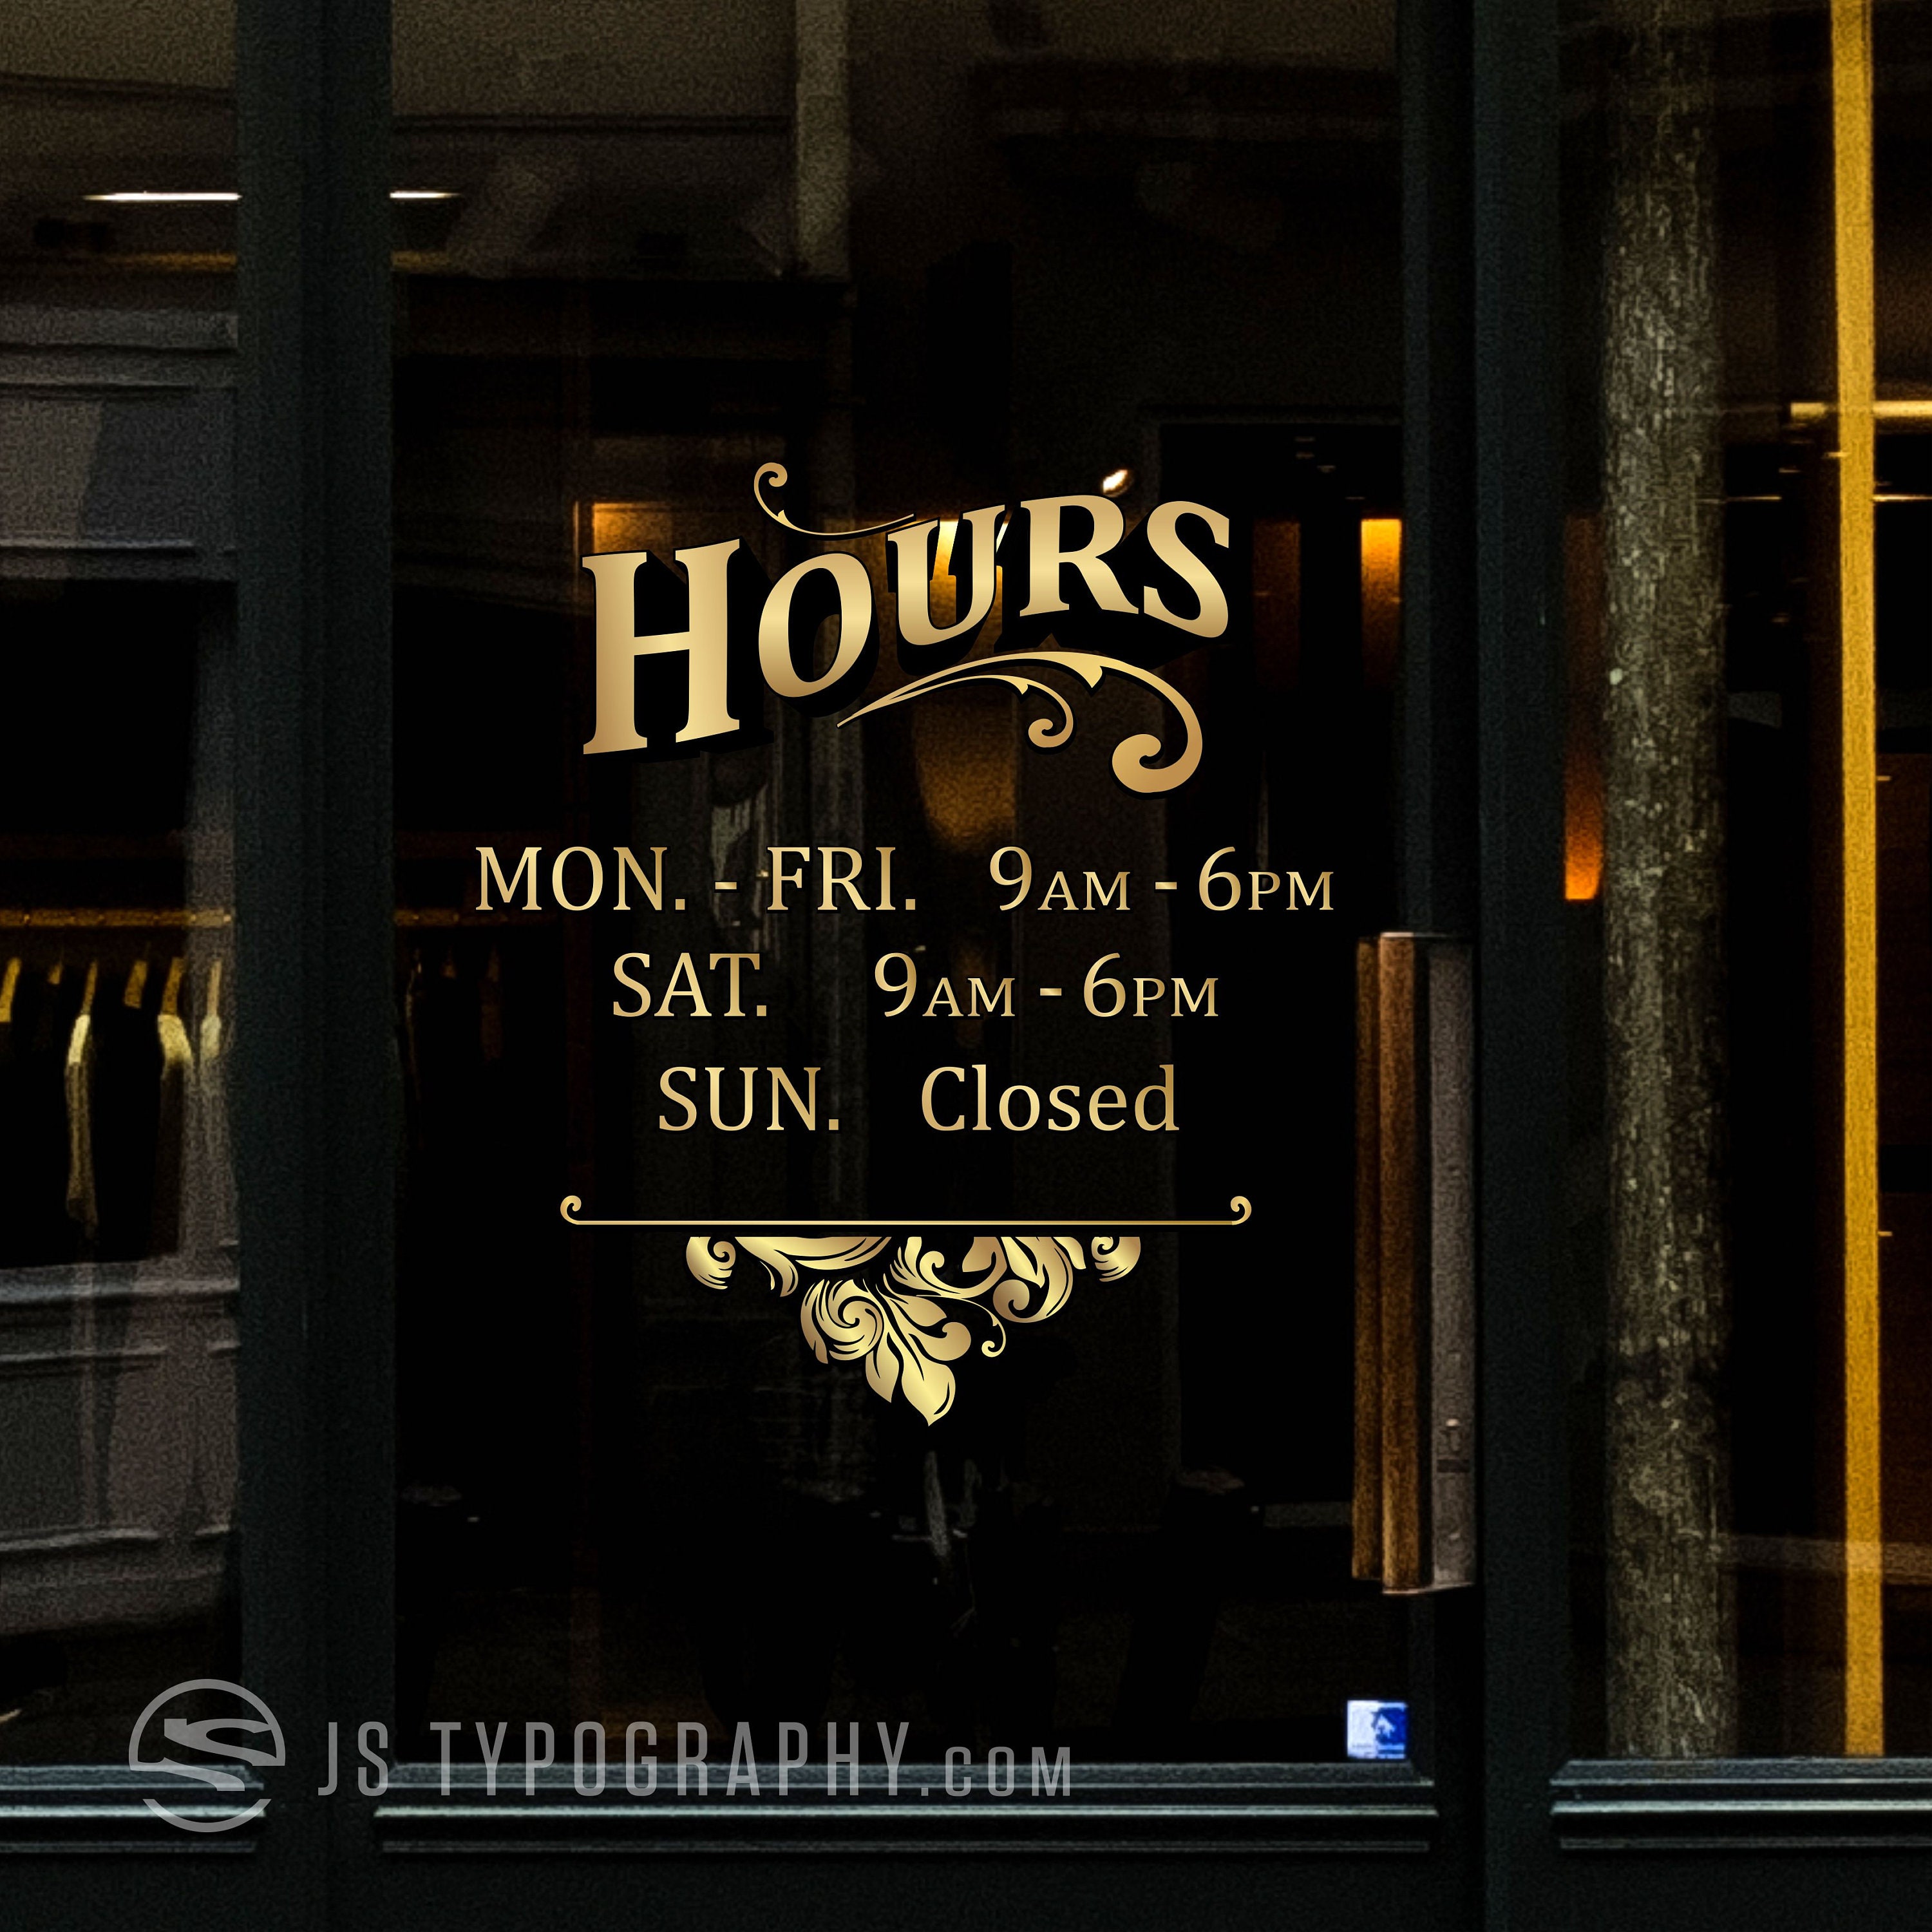 Store Hours Window Decal